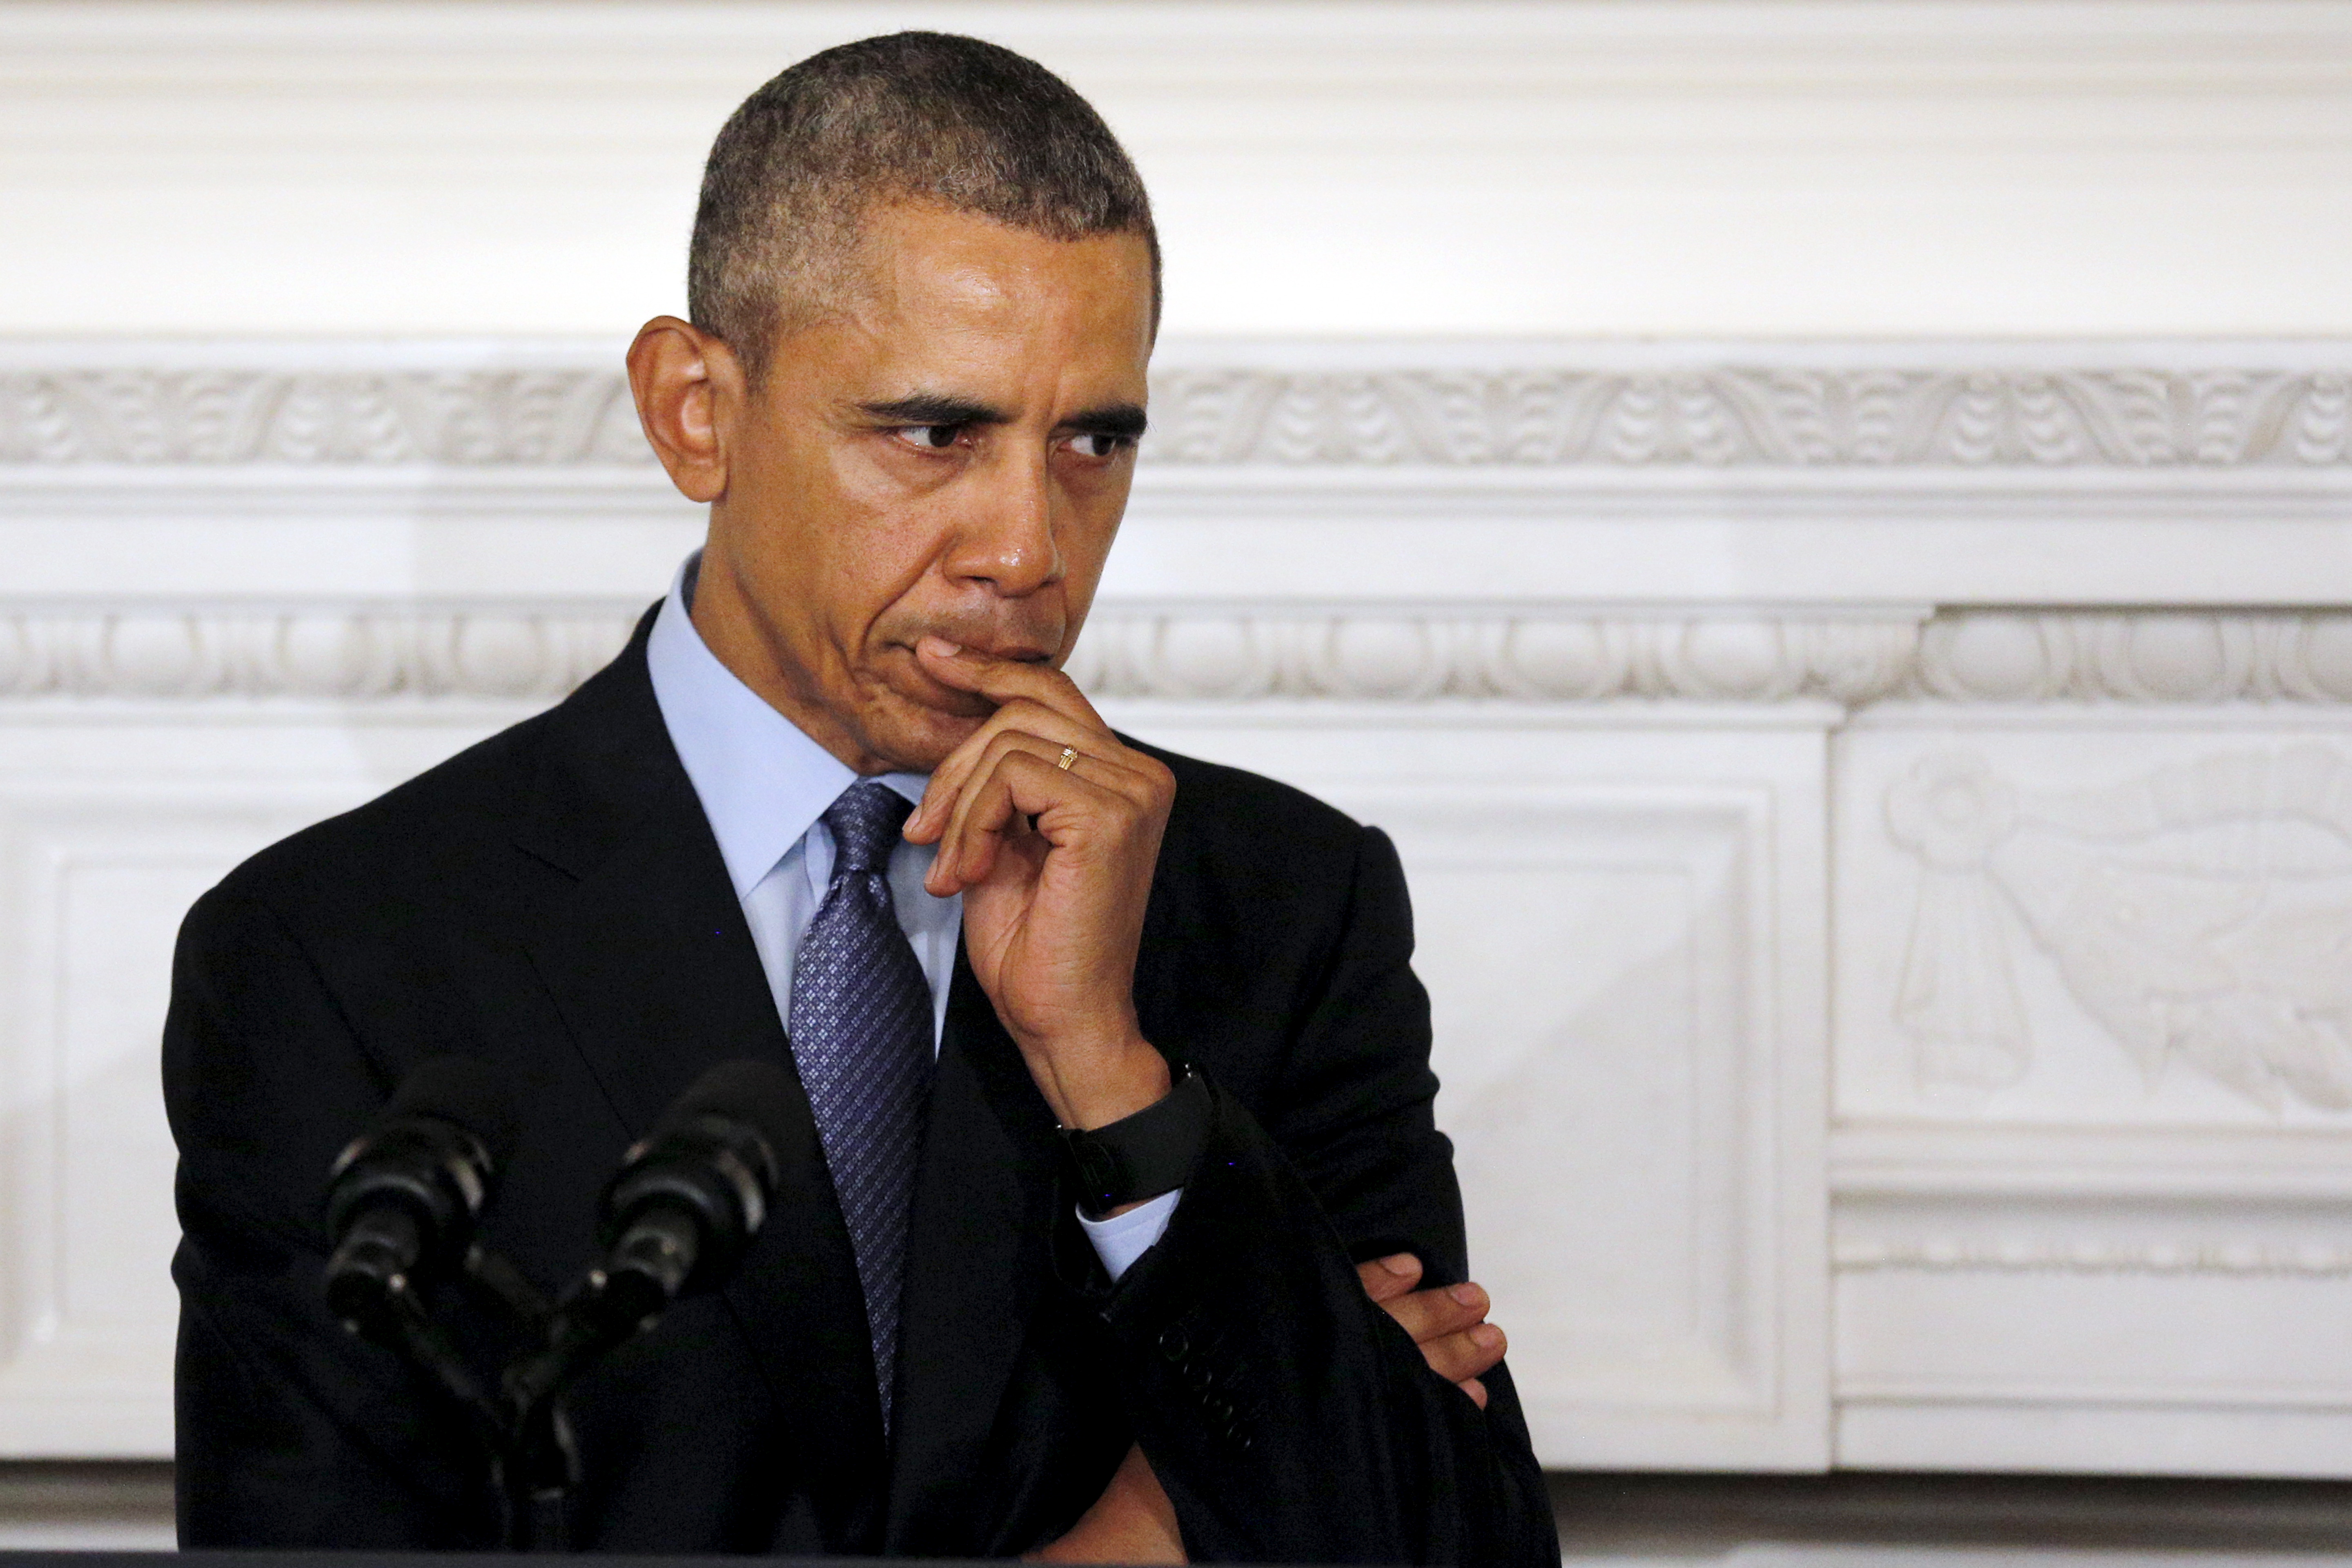 President Obama could have looked at the Islamic State problem from a different perspective.